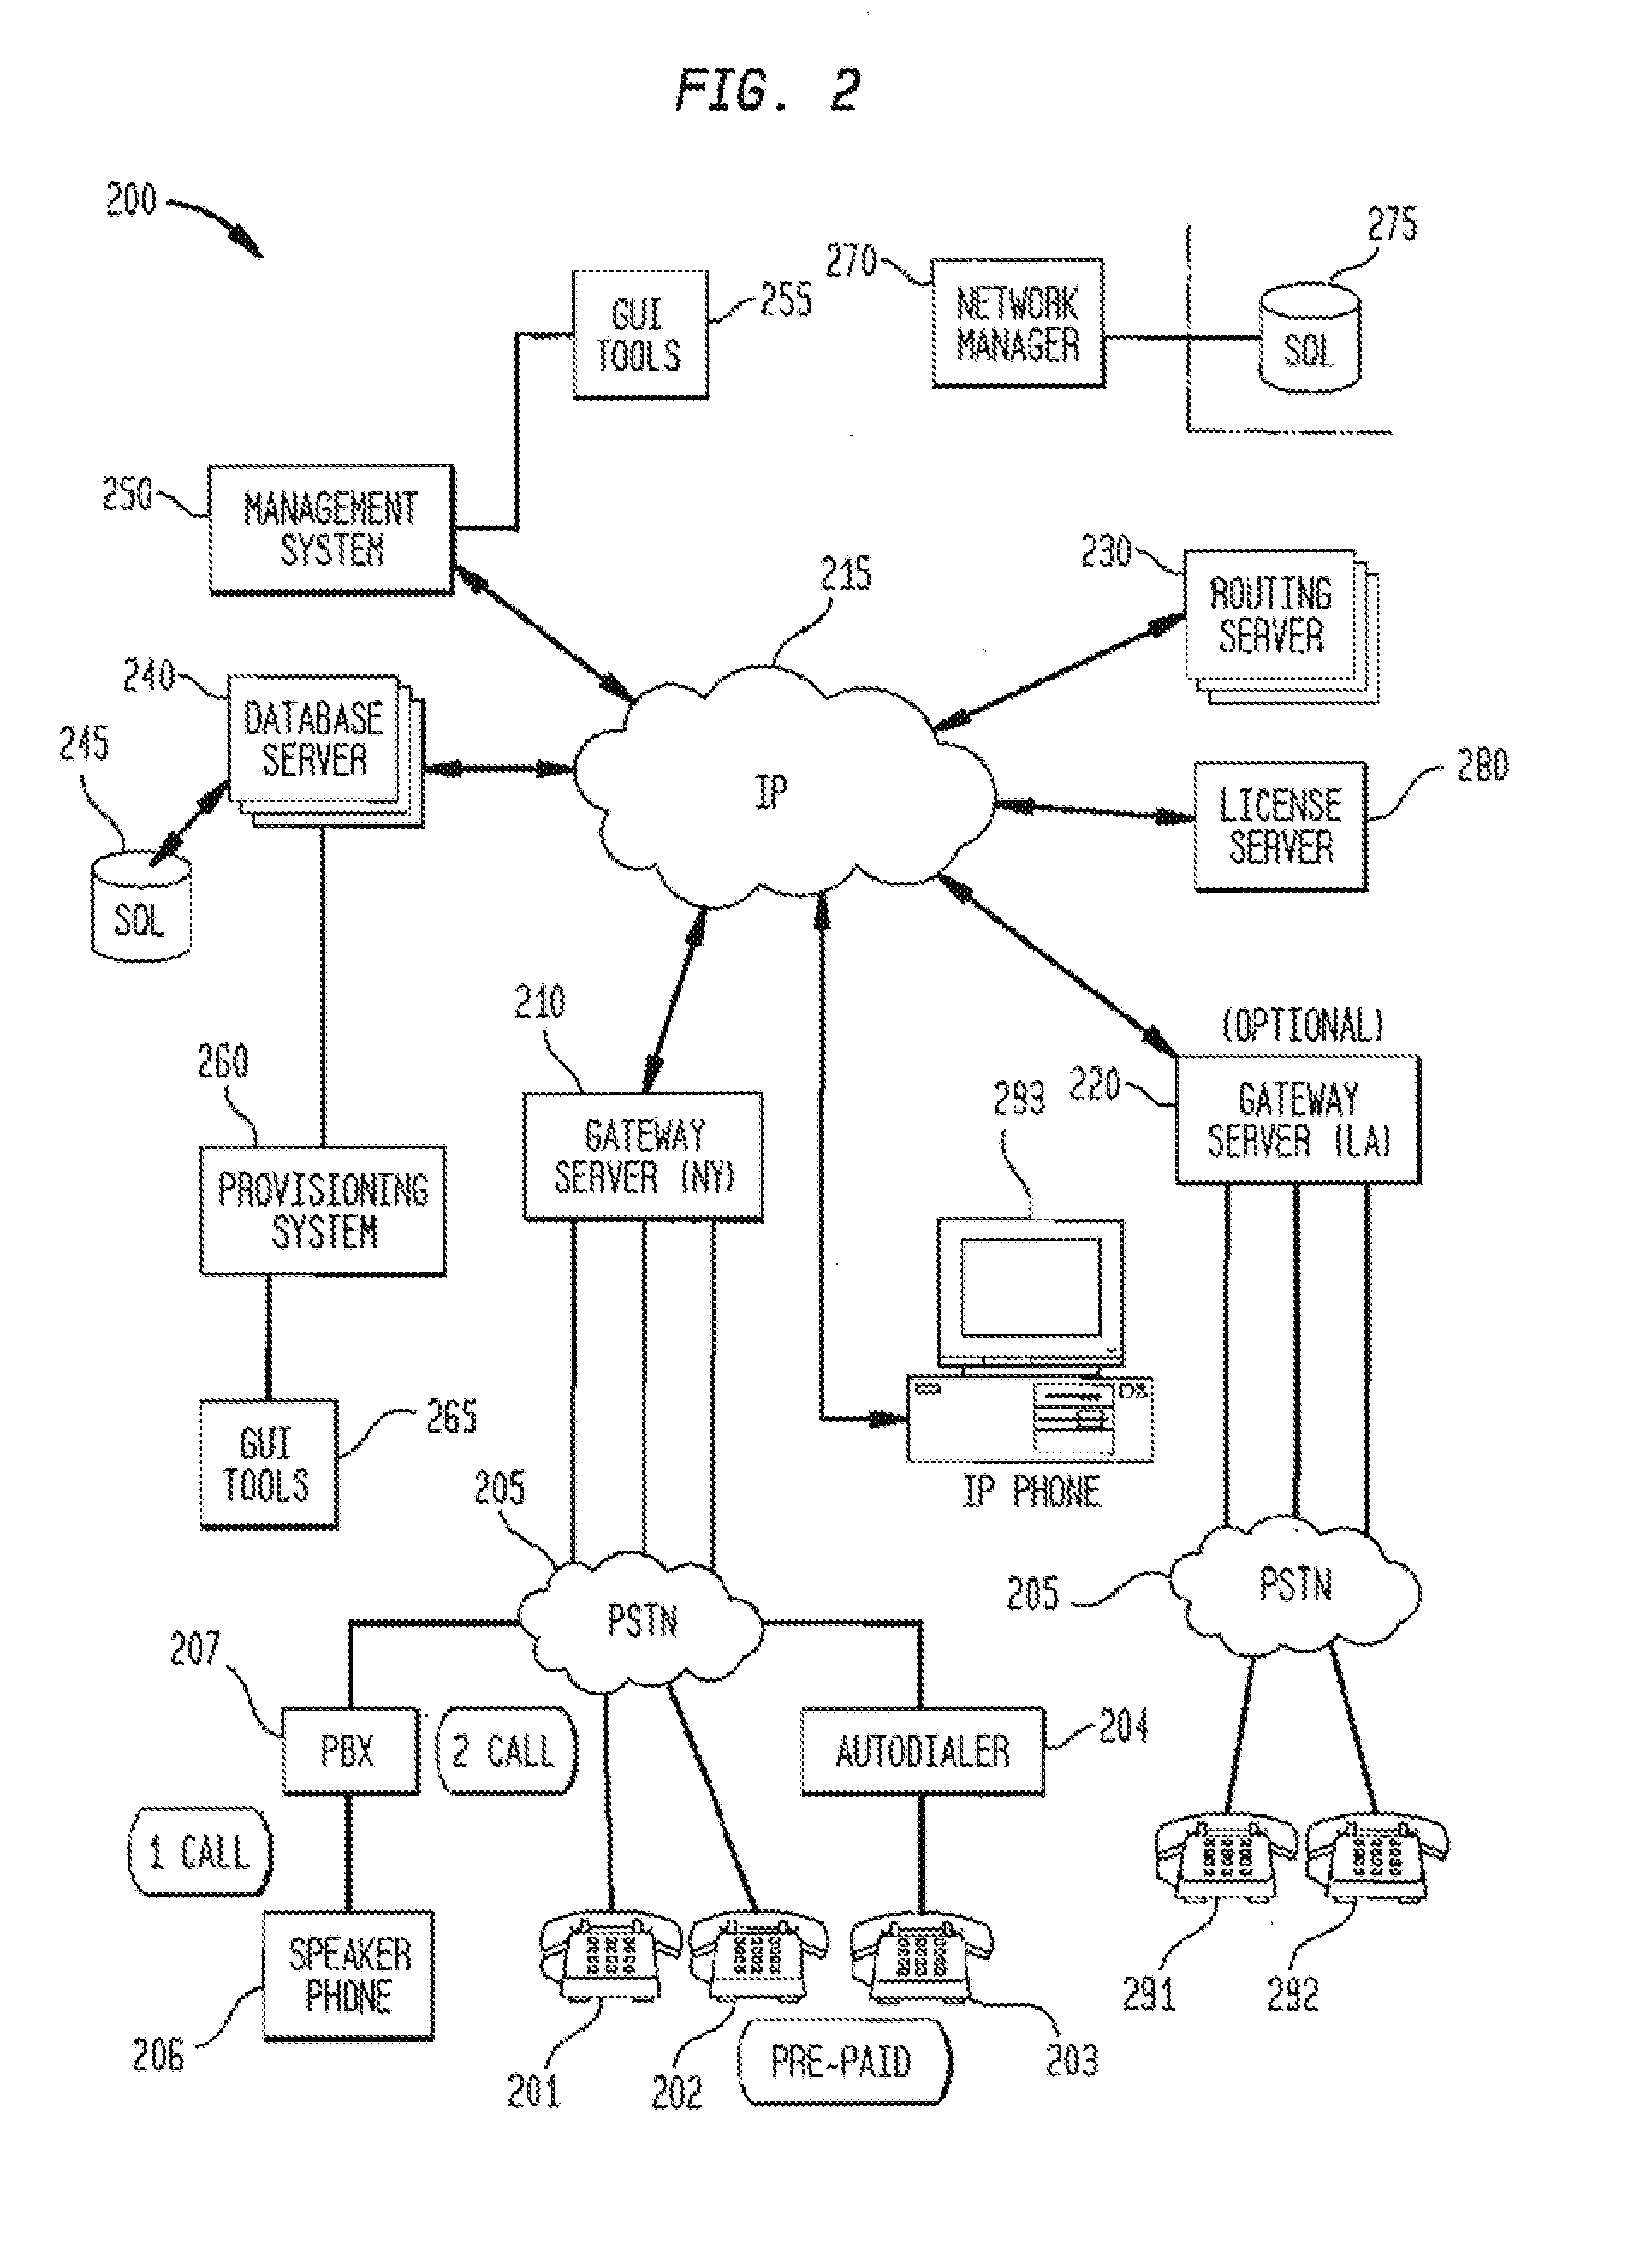 Method, System, and Computer Program Product for Managing Routing Servers and Services